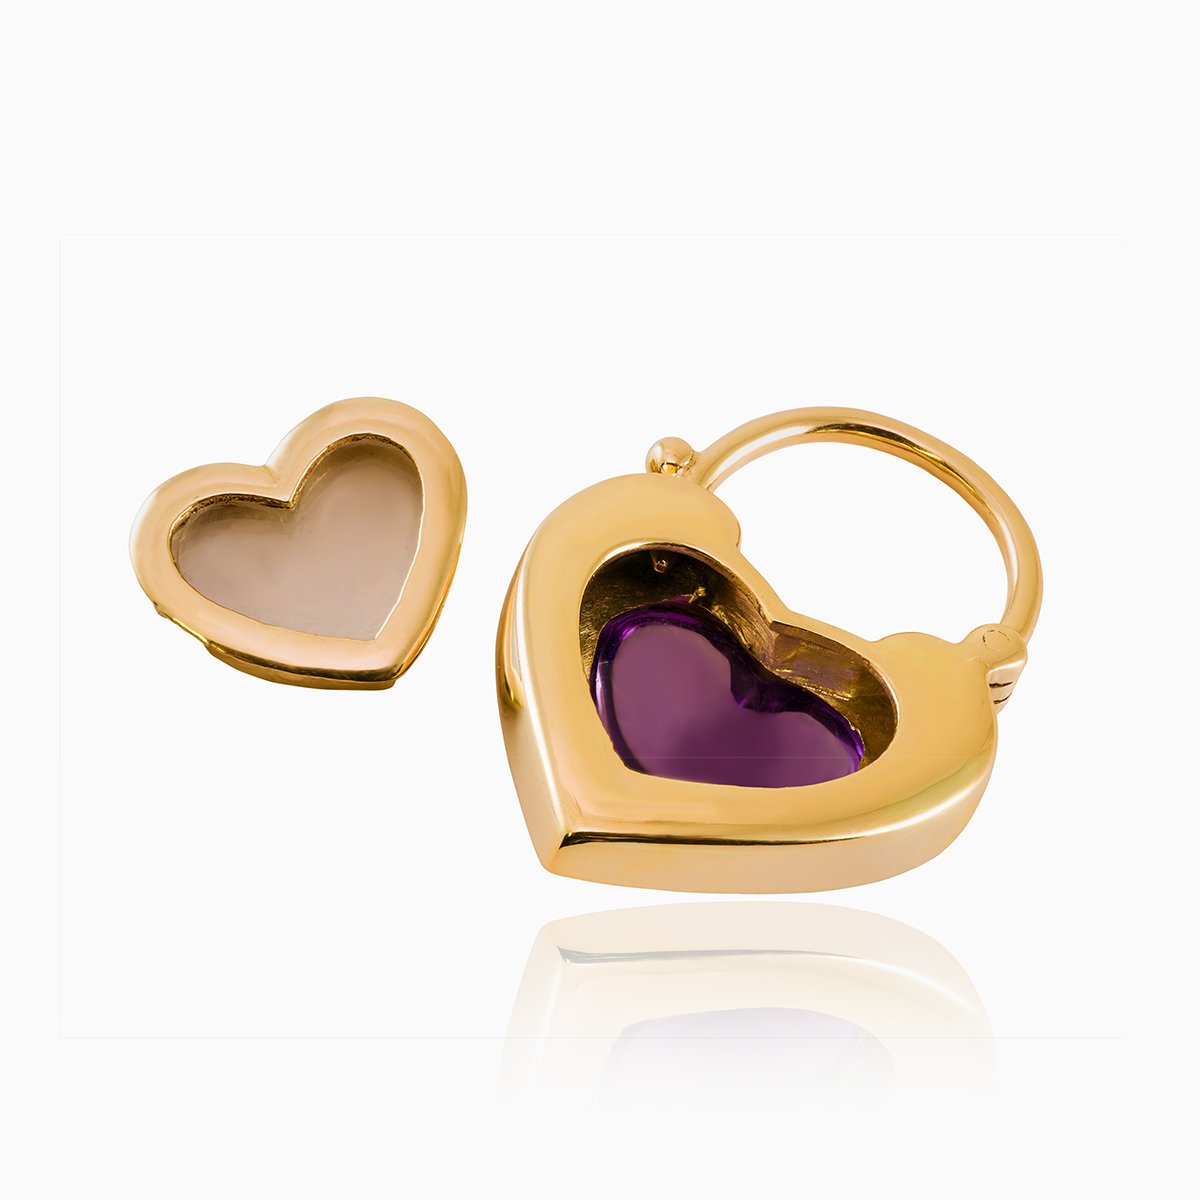 Open view of a 9 ct gold padlock shaped locket set with a purple cabochon amethyst stone